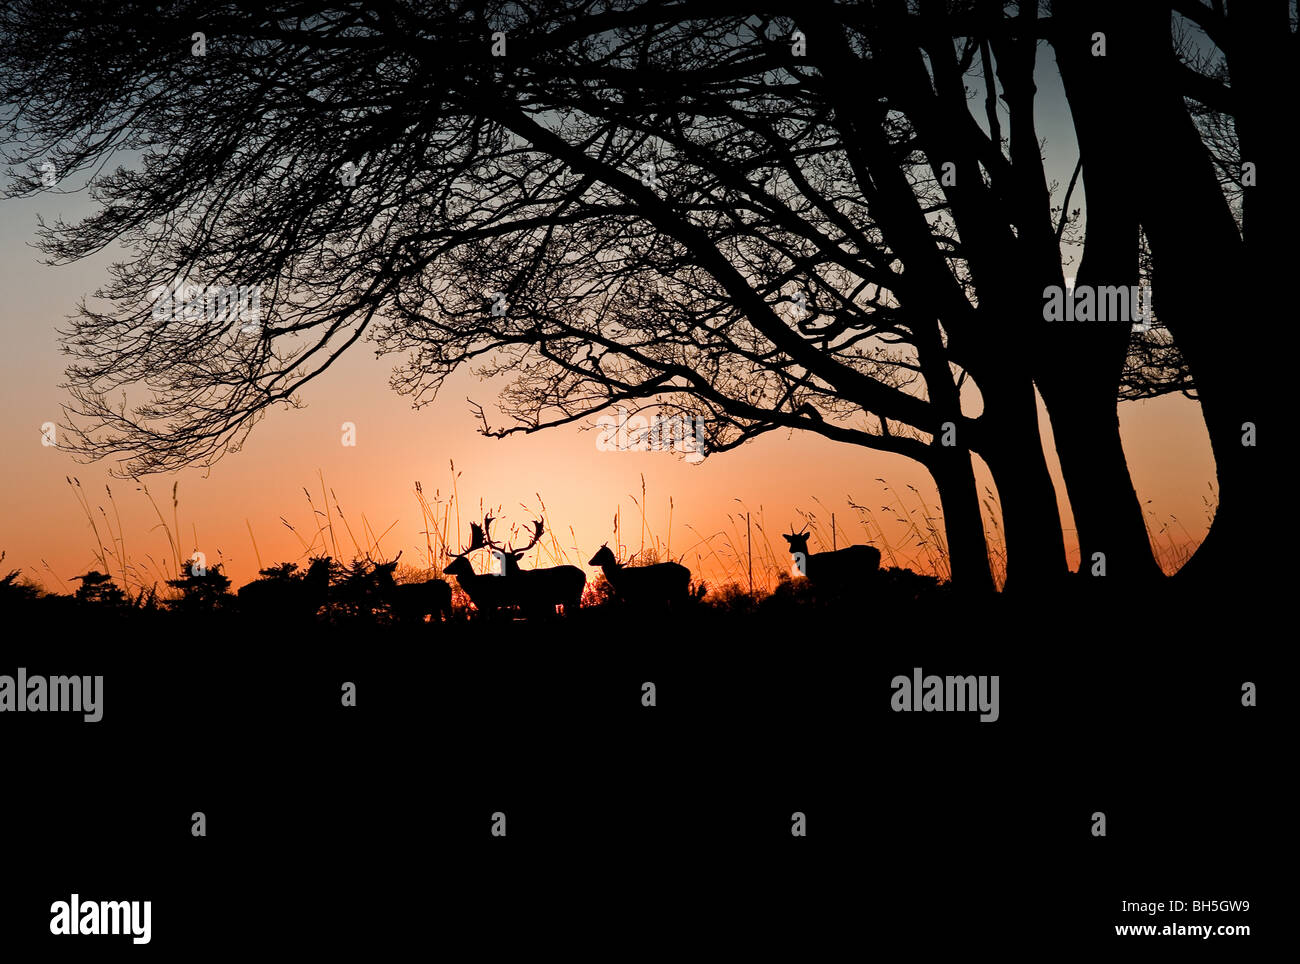 Trees and deer at sunset in Phoenix park, Dublin. Europes largest enclosed urban park. Stock Photo